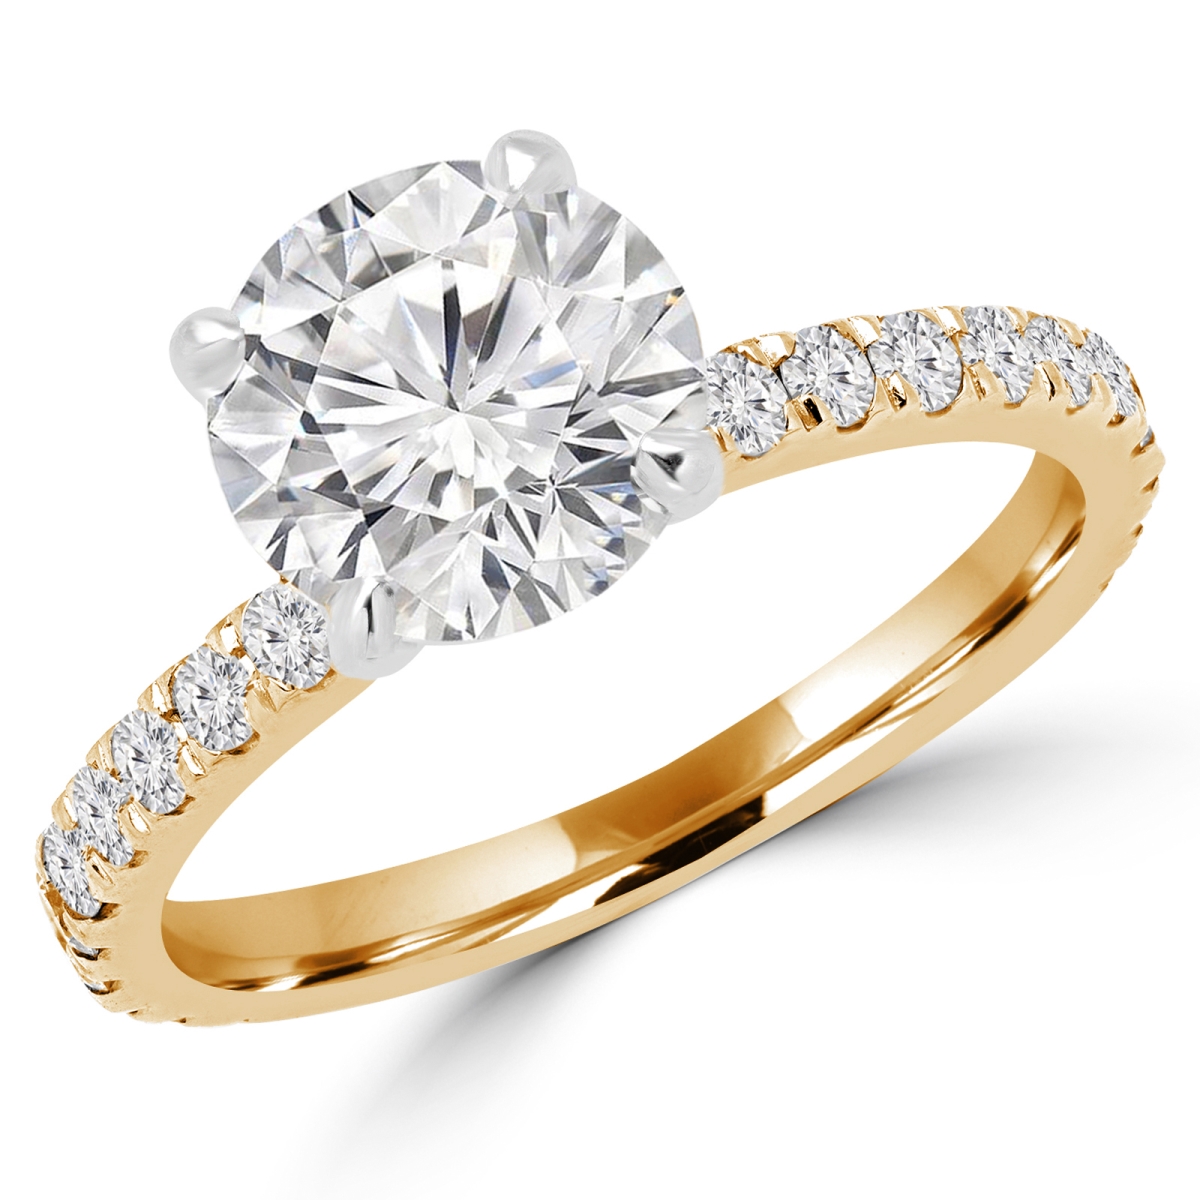 Picture of Majesty Diamonds MD160340-5.75 1 CTW Round Cut Diamond Multi Stone Engagement Ring in 14K Yellow Gold - Size 5.75